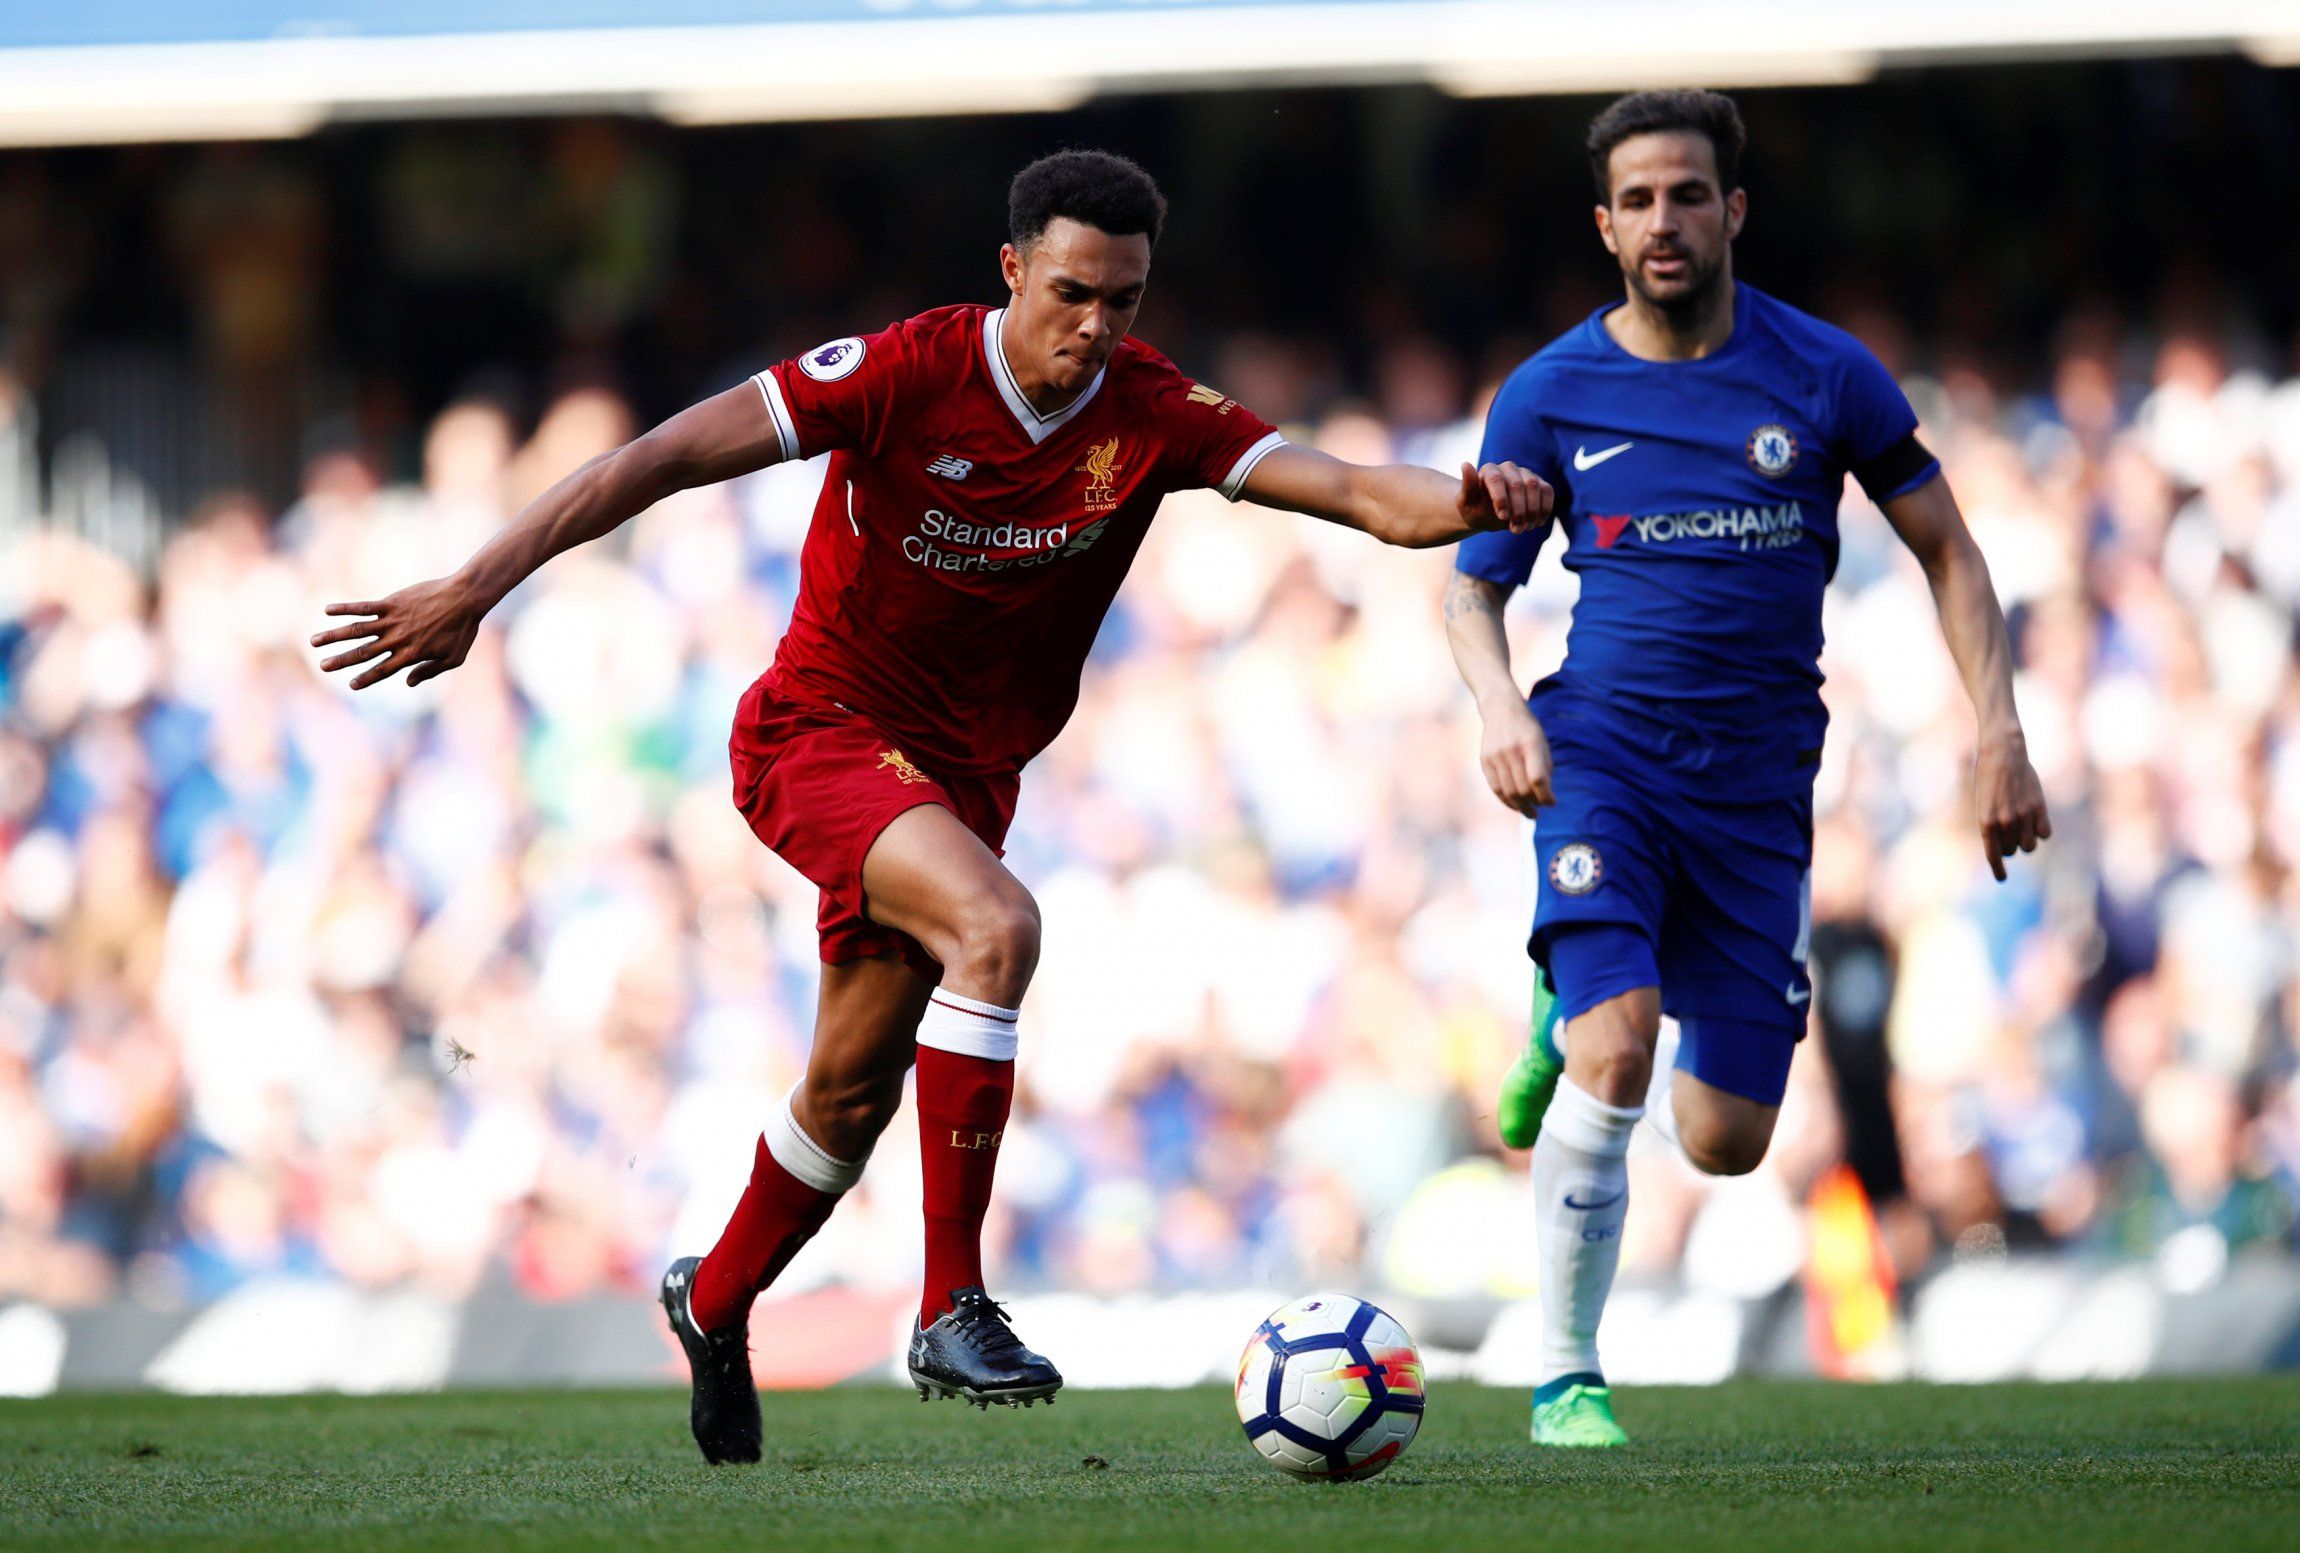 Trent Alexander-Arnold shapes up to shoot